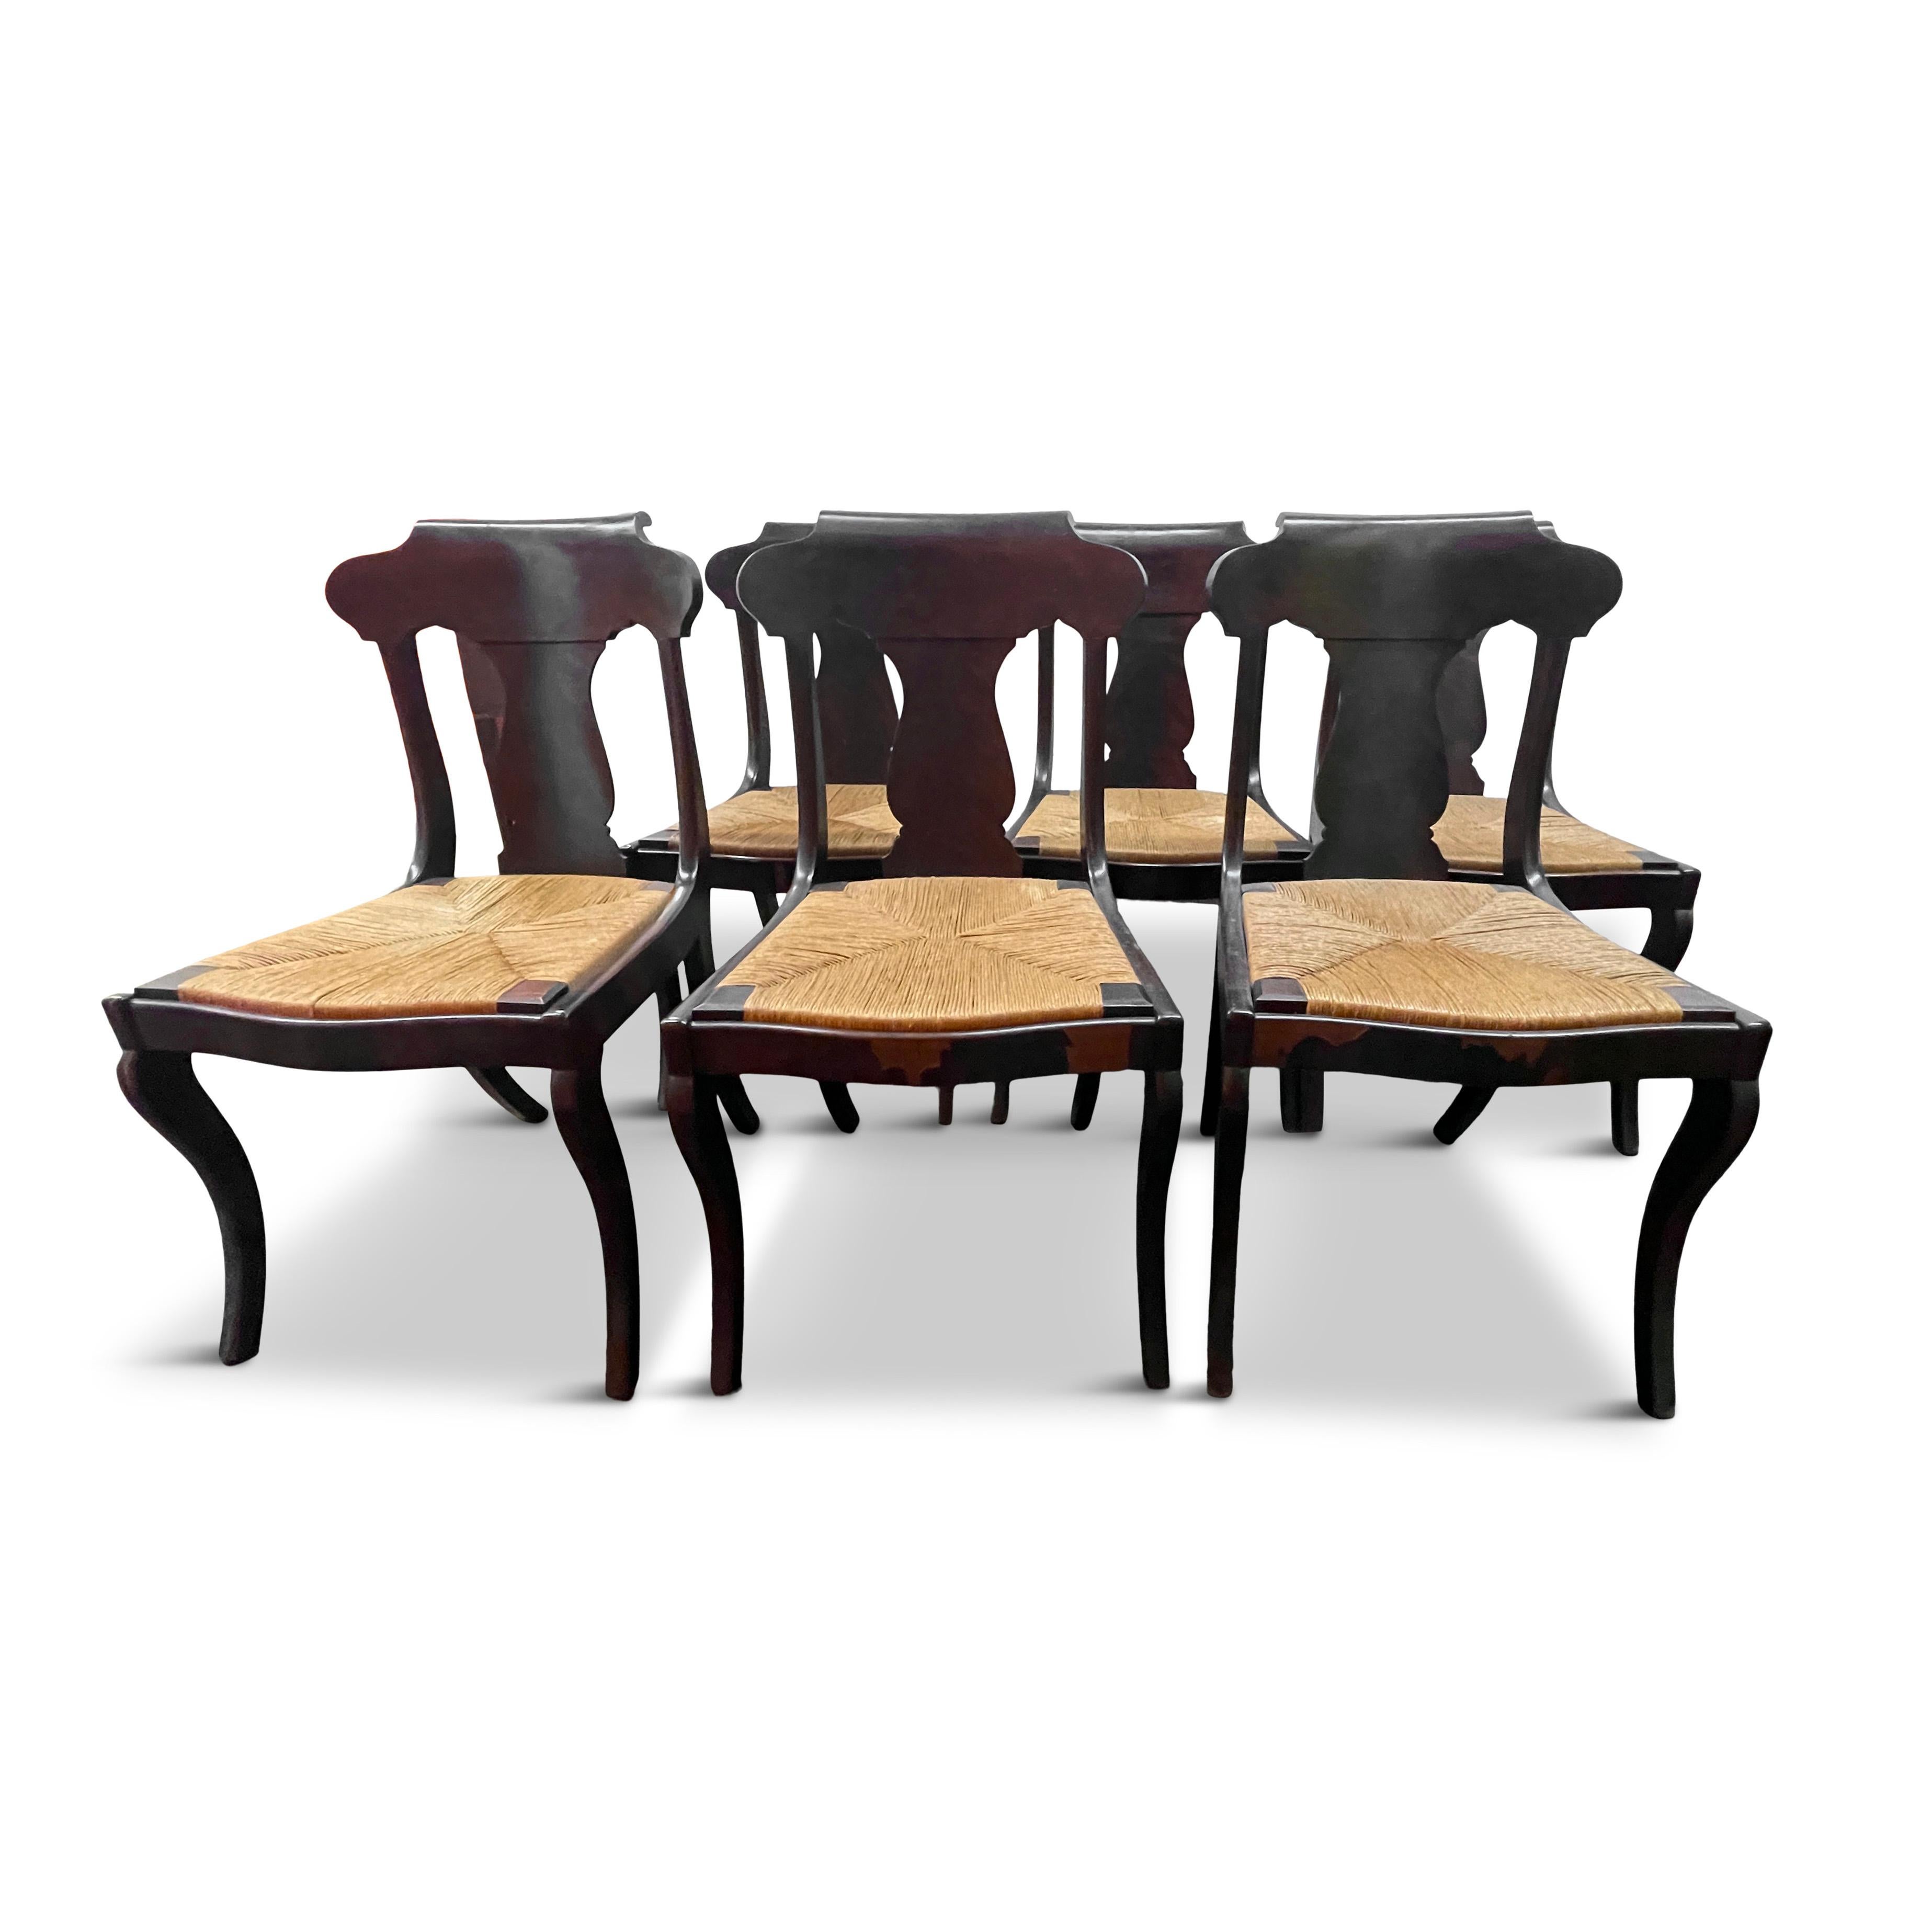 A lovely set of eight chairs with arched back, urn shaped back plate, saber front legs, splayed back legs, mahogany veneer over hardwood, and woven rush seats. From the mid to late 19th century, this set of chairs are traditional in materials,